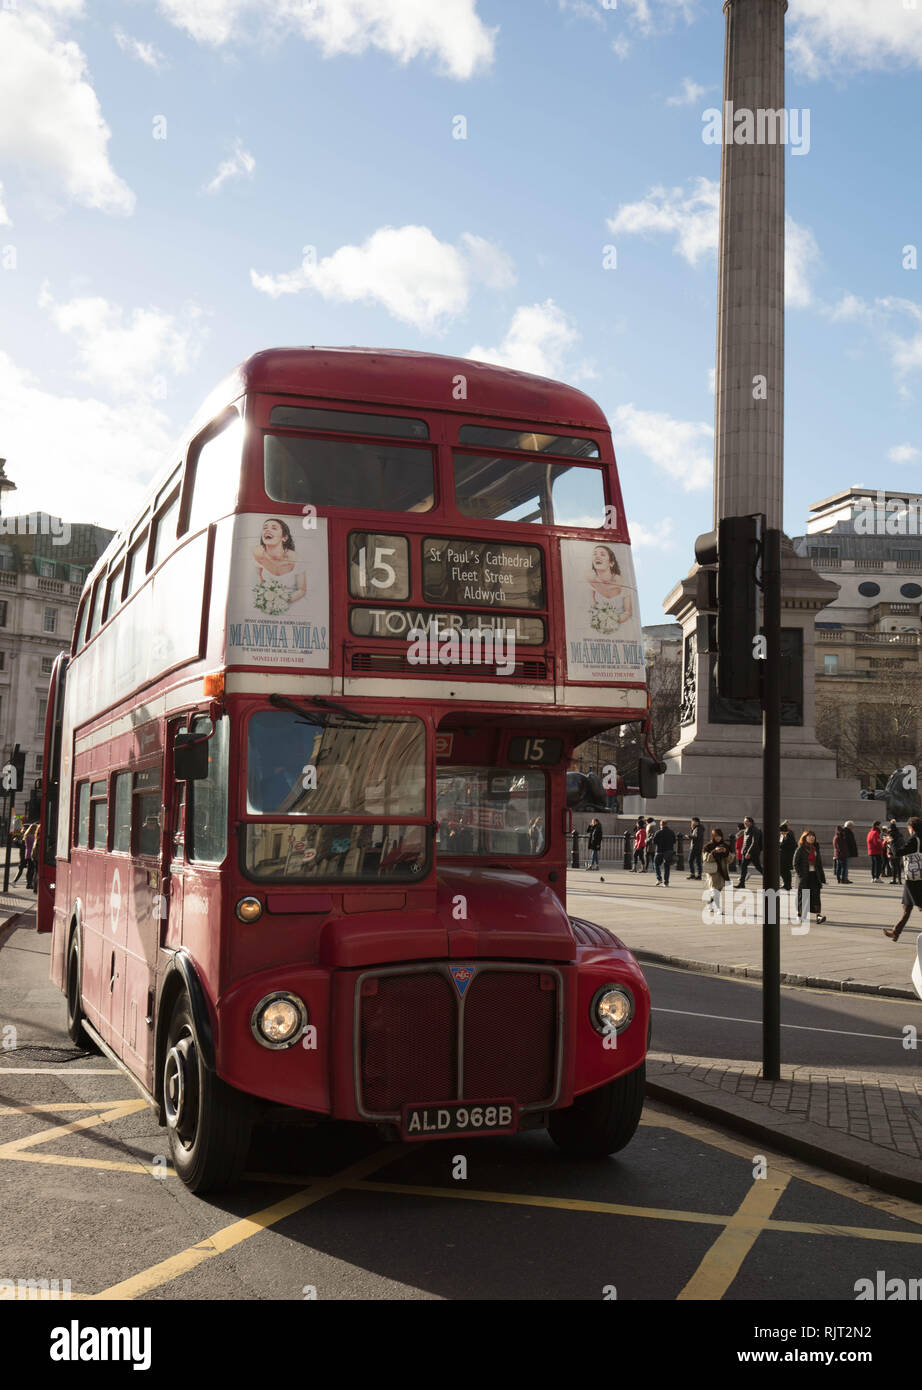 London, UK. 7th February 2019. Heritage Bus of Route 15, here near Trafalgar Square, London, will stop running as from the 2nd March 2019, after many years of service. Credit: Joe Kuis / Alamy Live News Stock Photo